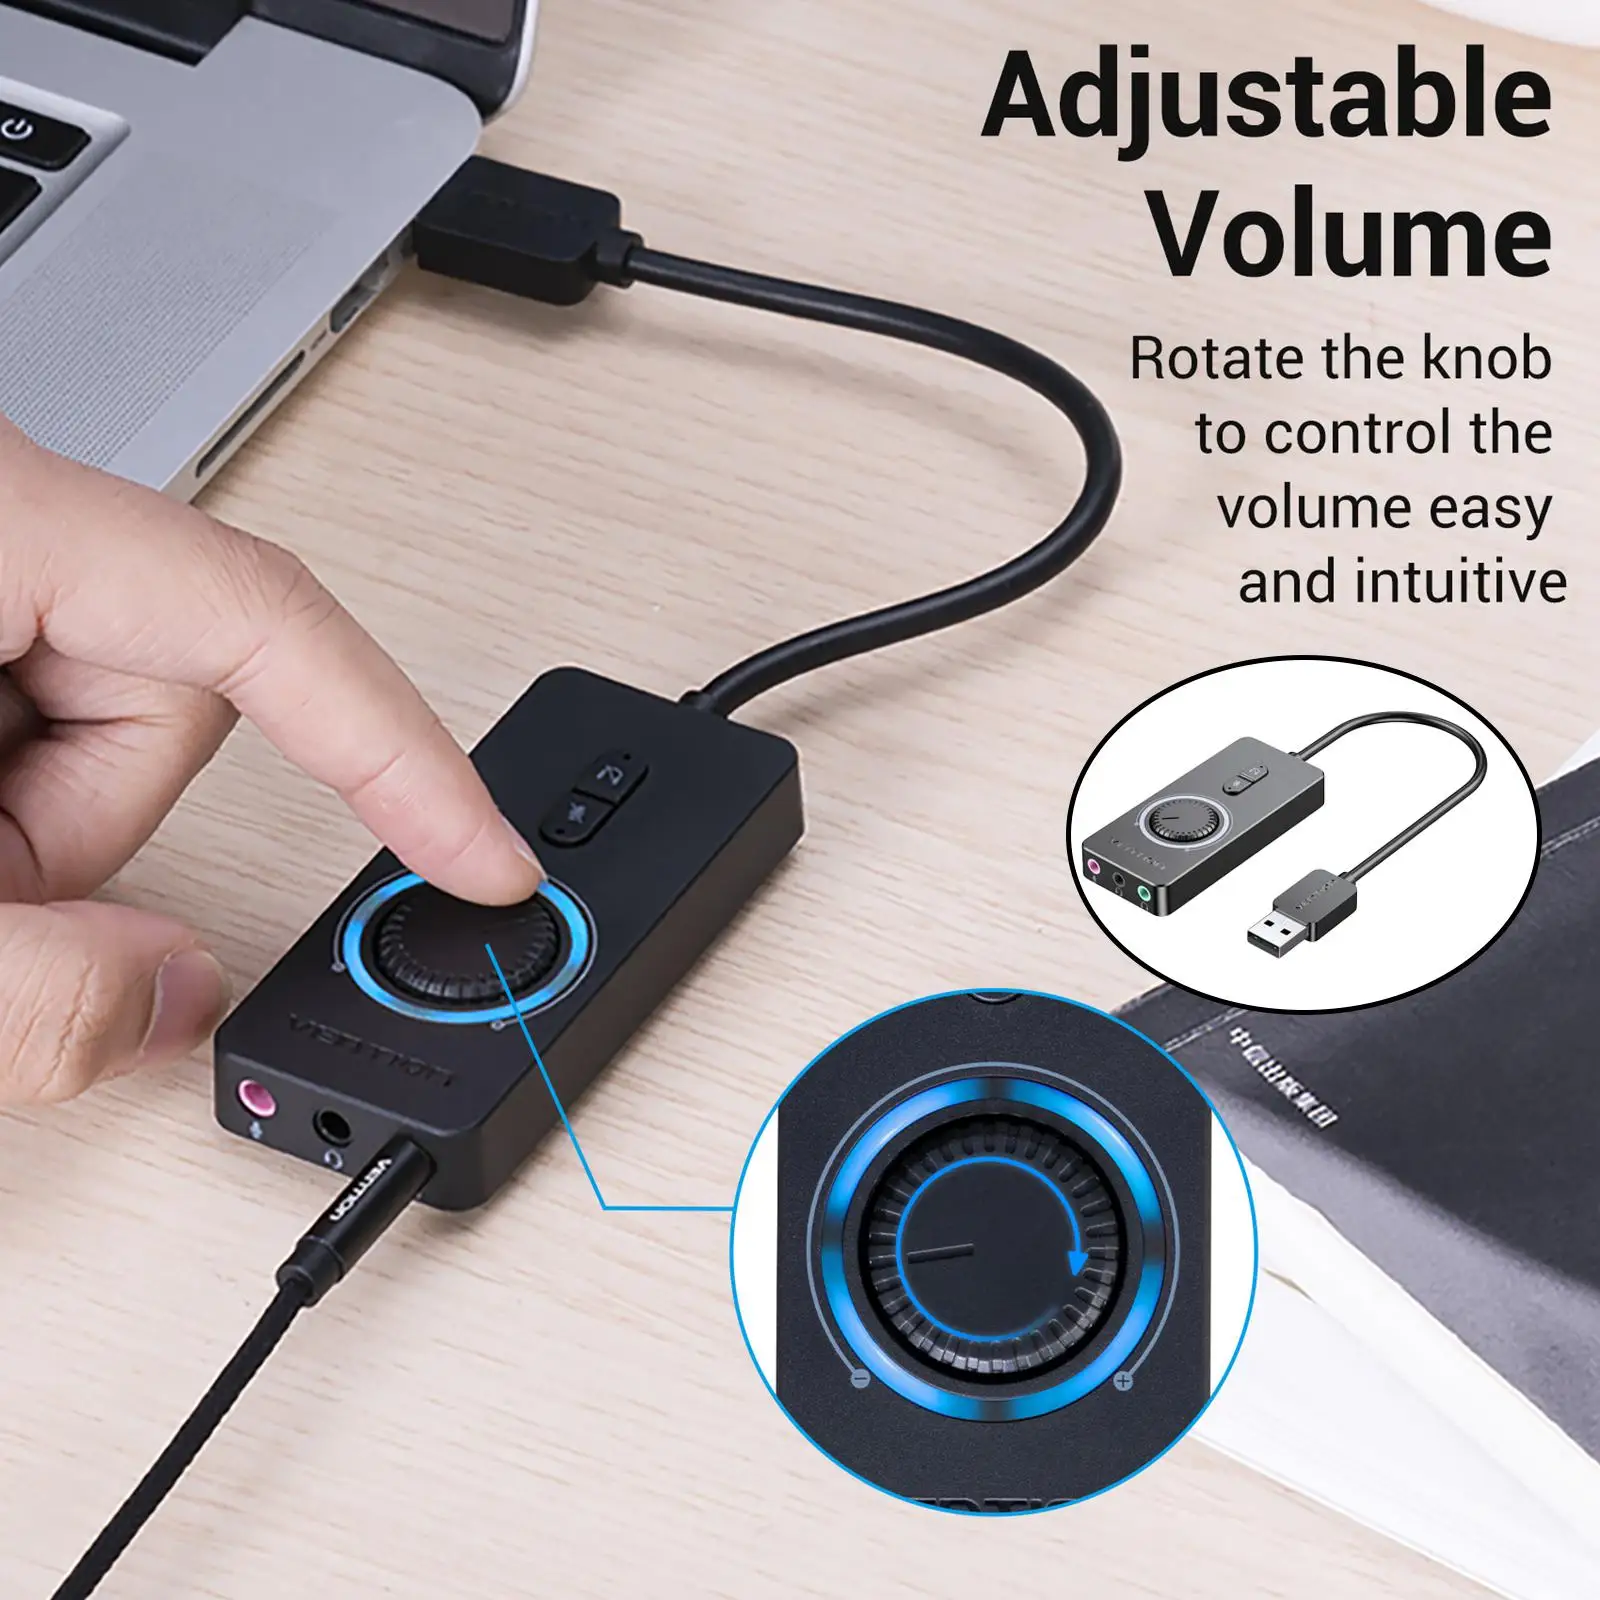 External Stereo Sound Adapter Audio Adapter No Drivers Needed USB Sound Card for Laptops Windows